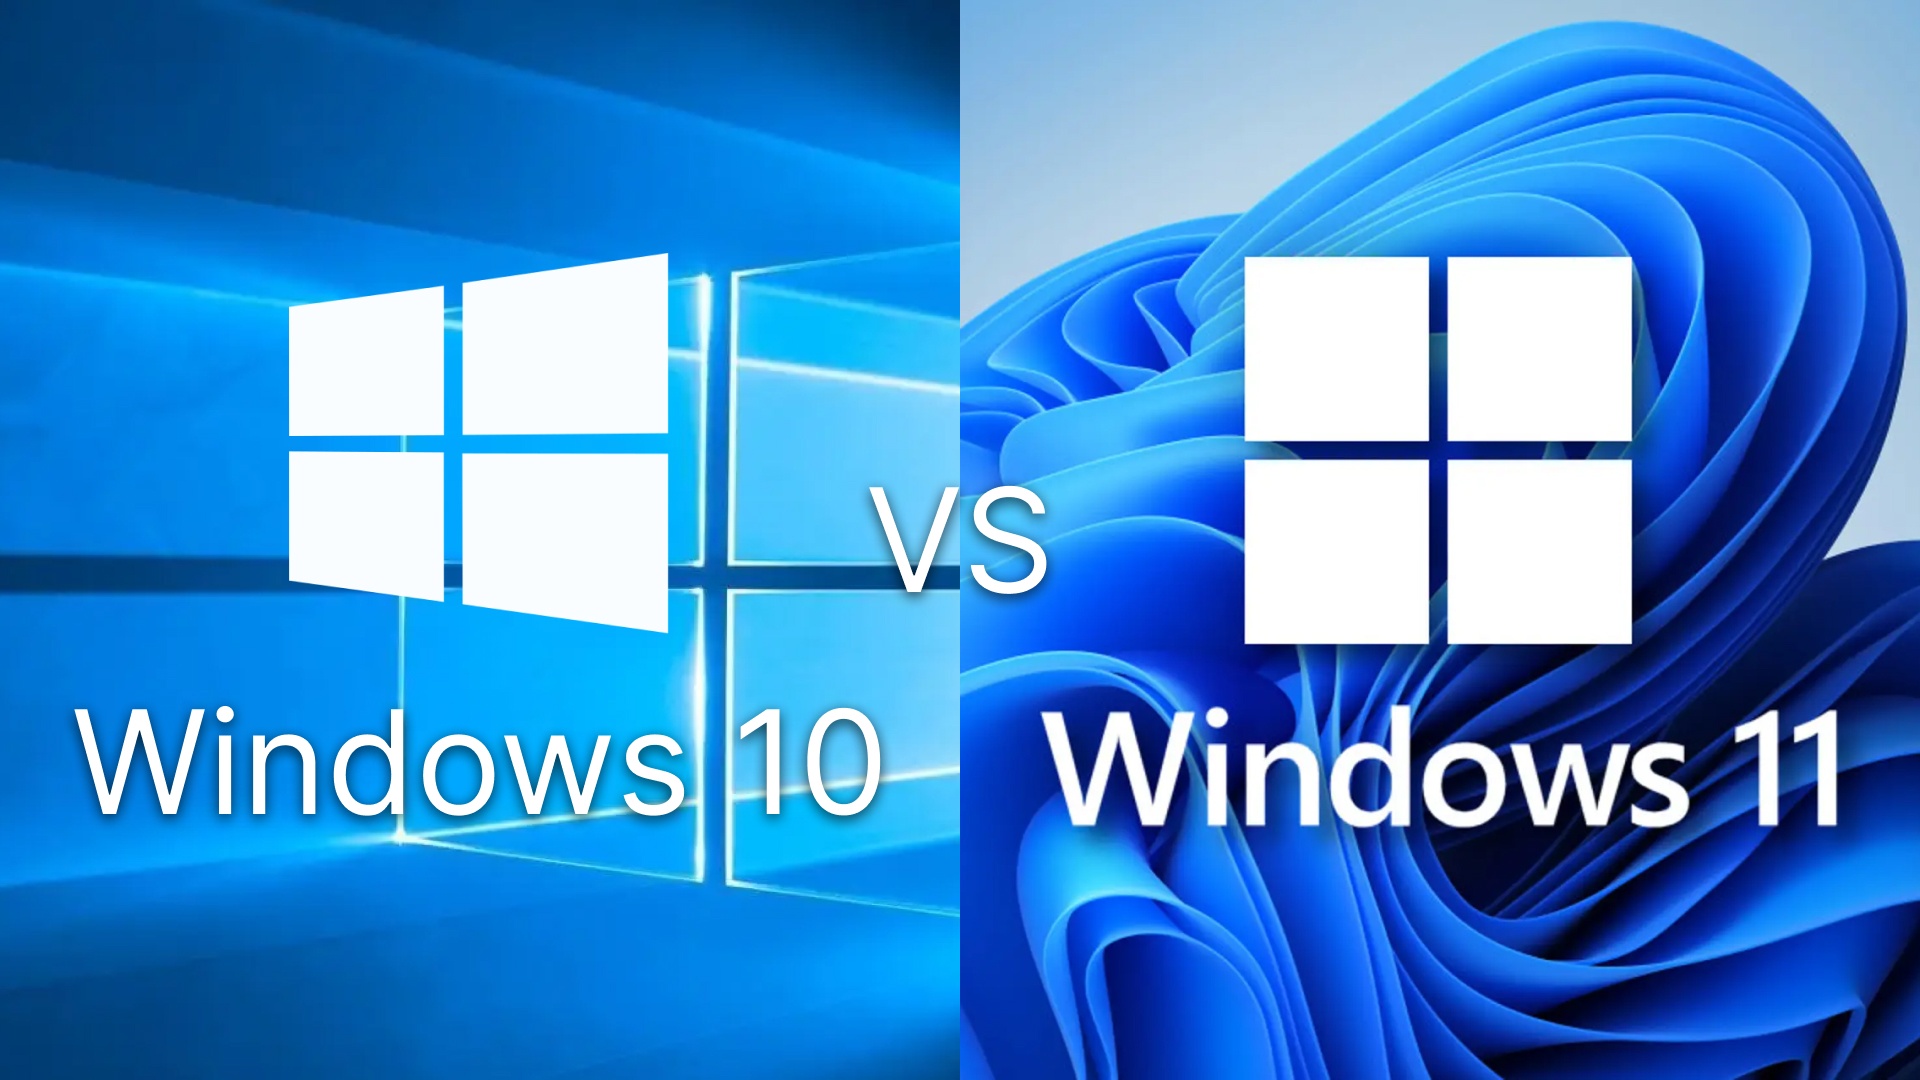 Windows 10 vs Windows 11: A Comprehensive Comparison of Features and ...